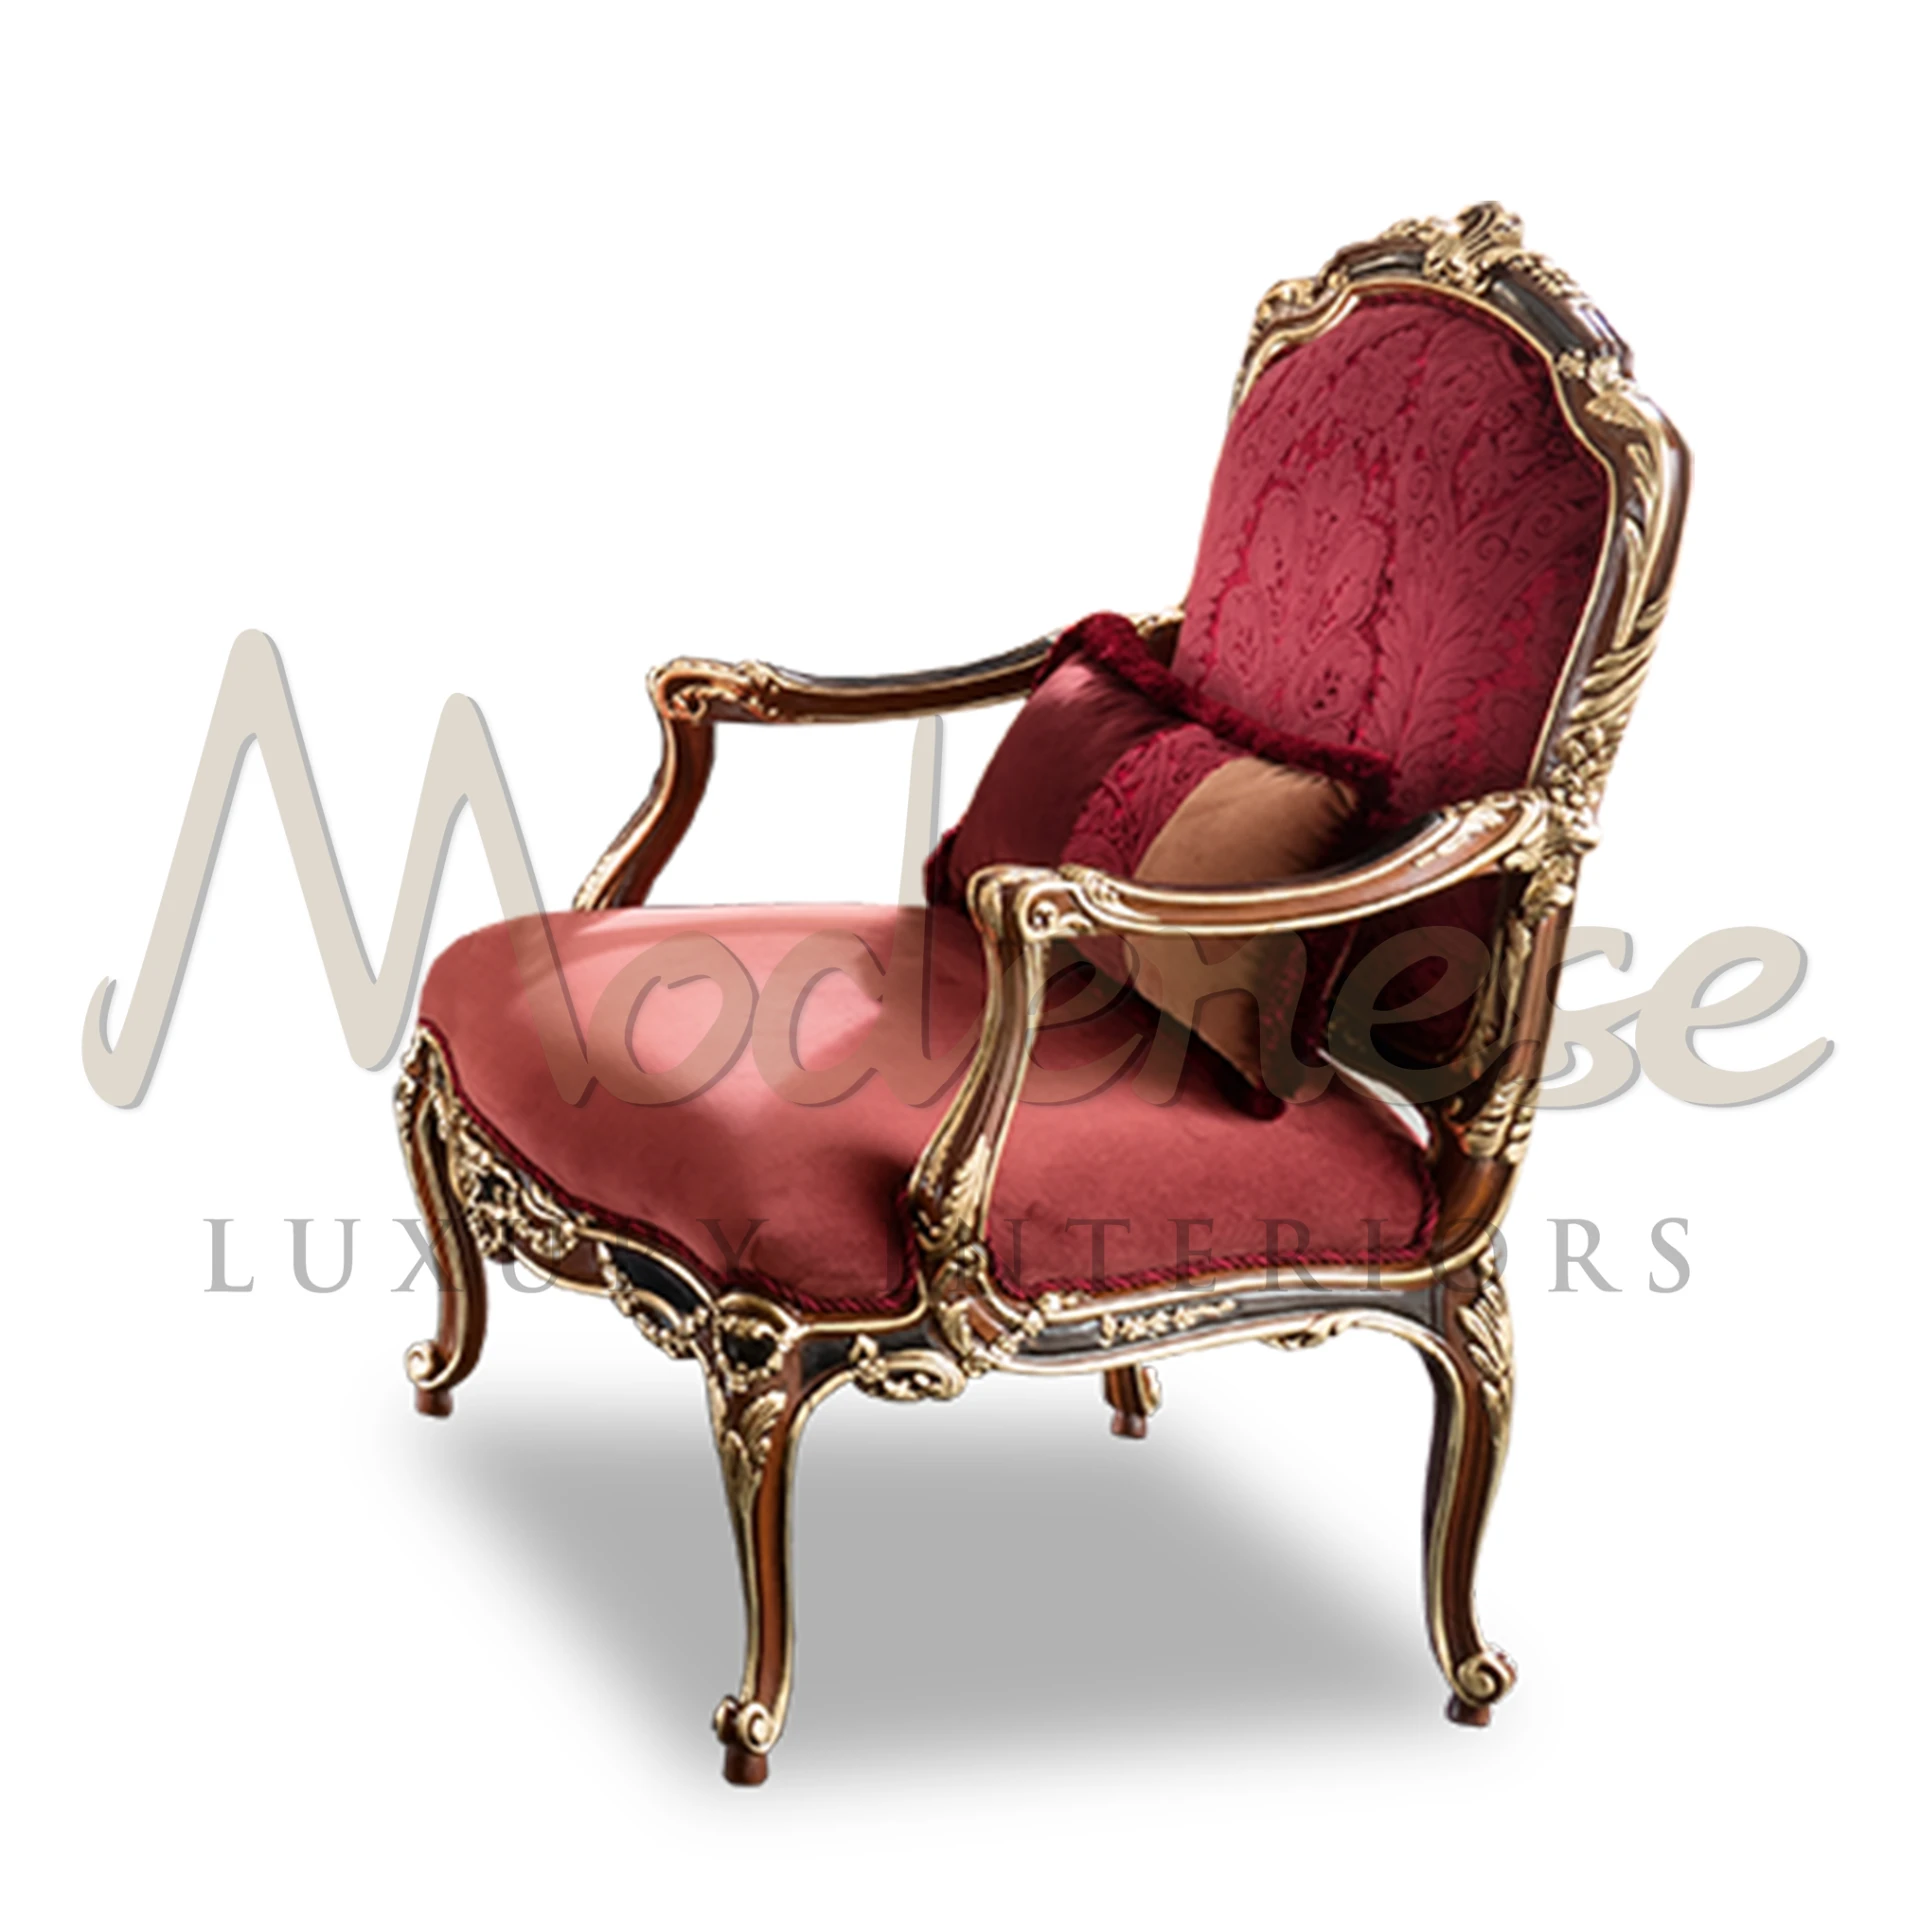 Elegant Royal Burgundy Armchair with luxurious velvet upholstery and classic walnut finishing for a regal interior design.
